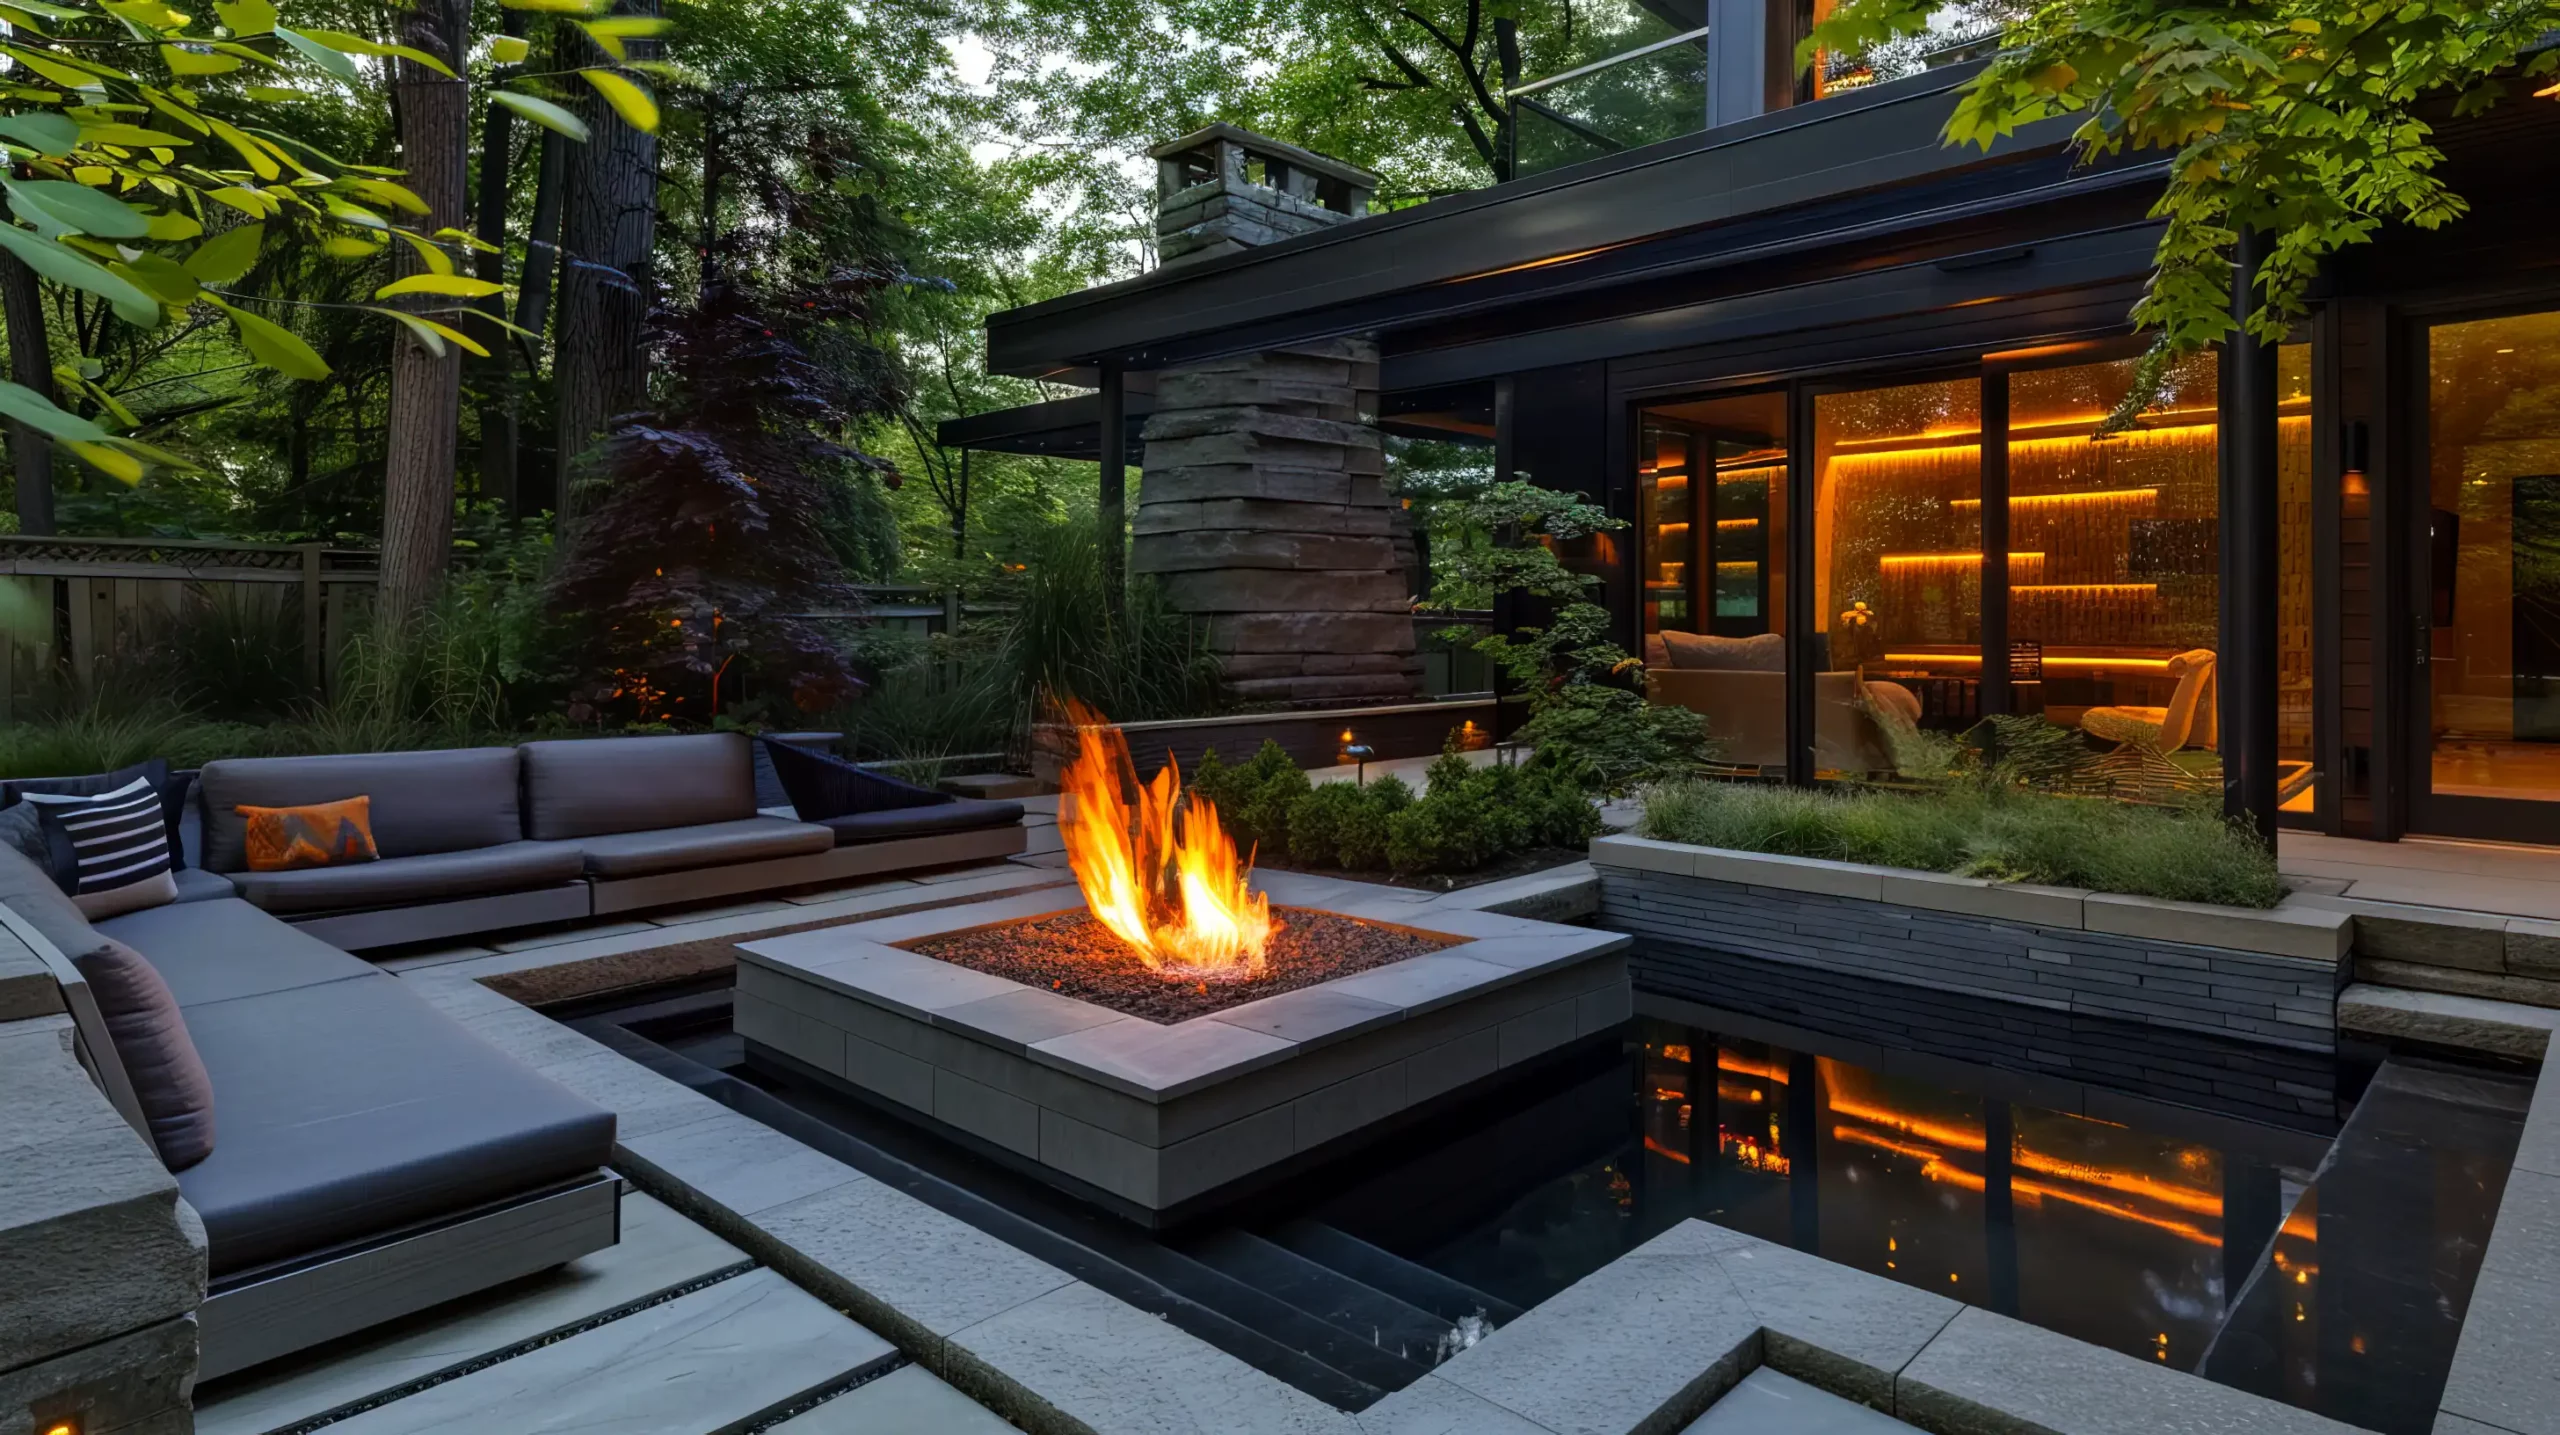 Cozy_Fire_Pit_and_Reflective_Water_Basin_CombinatION4